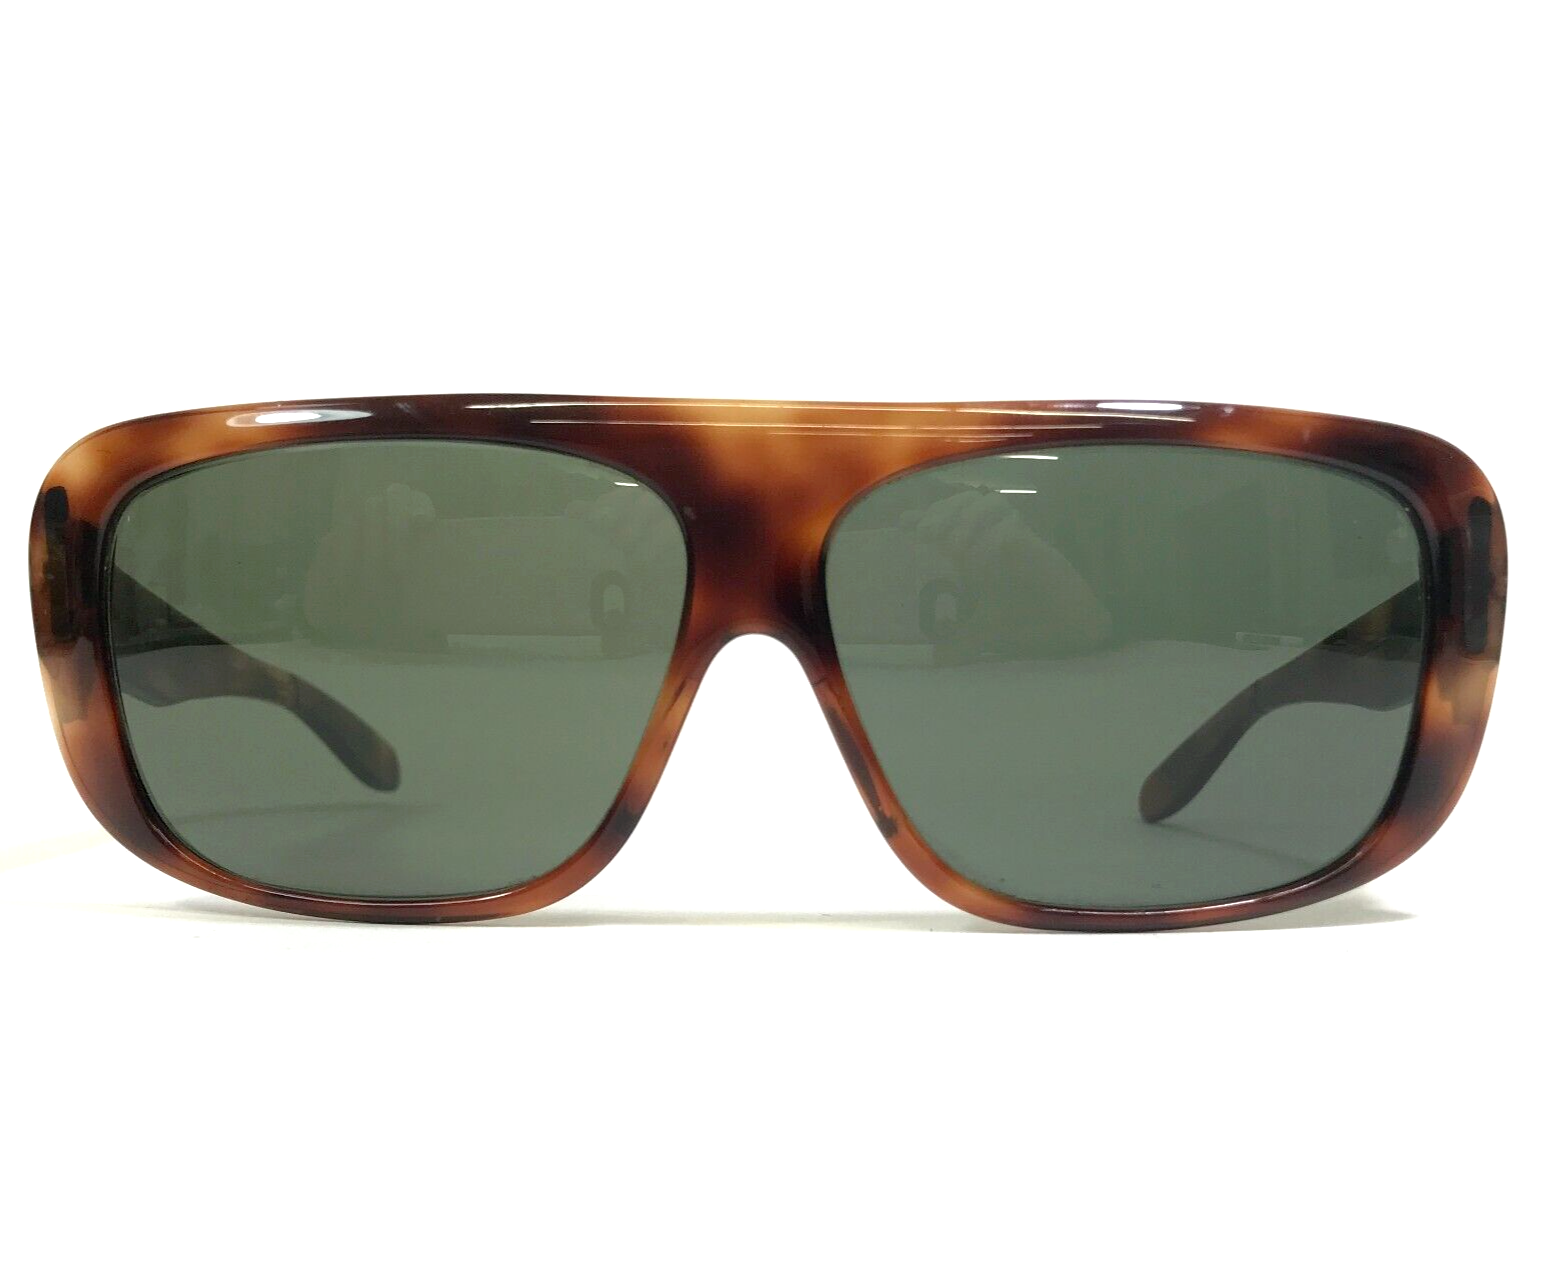 Vintage Bausch & Lomb B&L Ray-Ban Sunglasses BLAIR Oversized with Green Lenses - $74.58